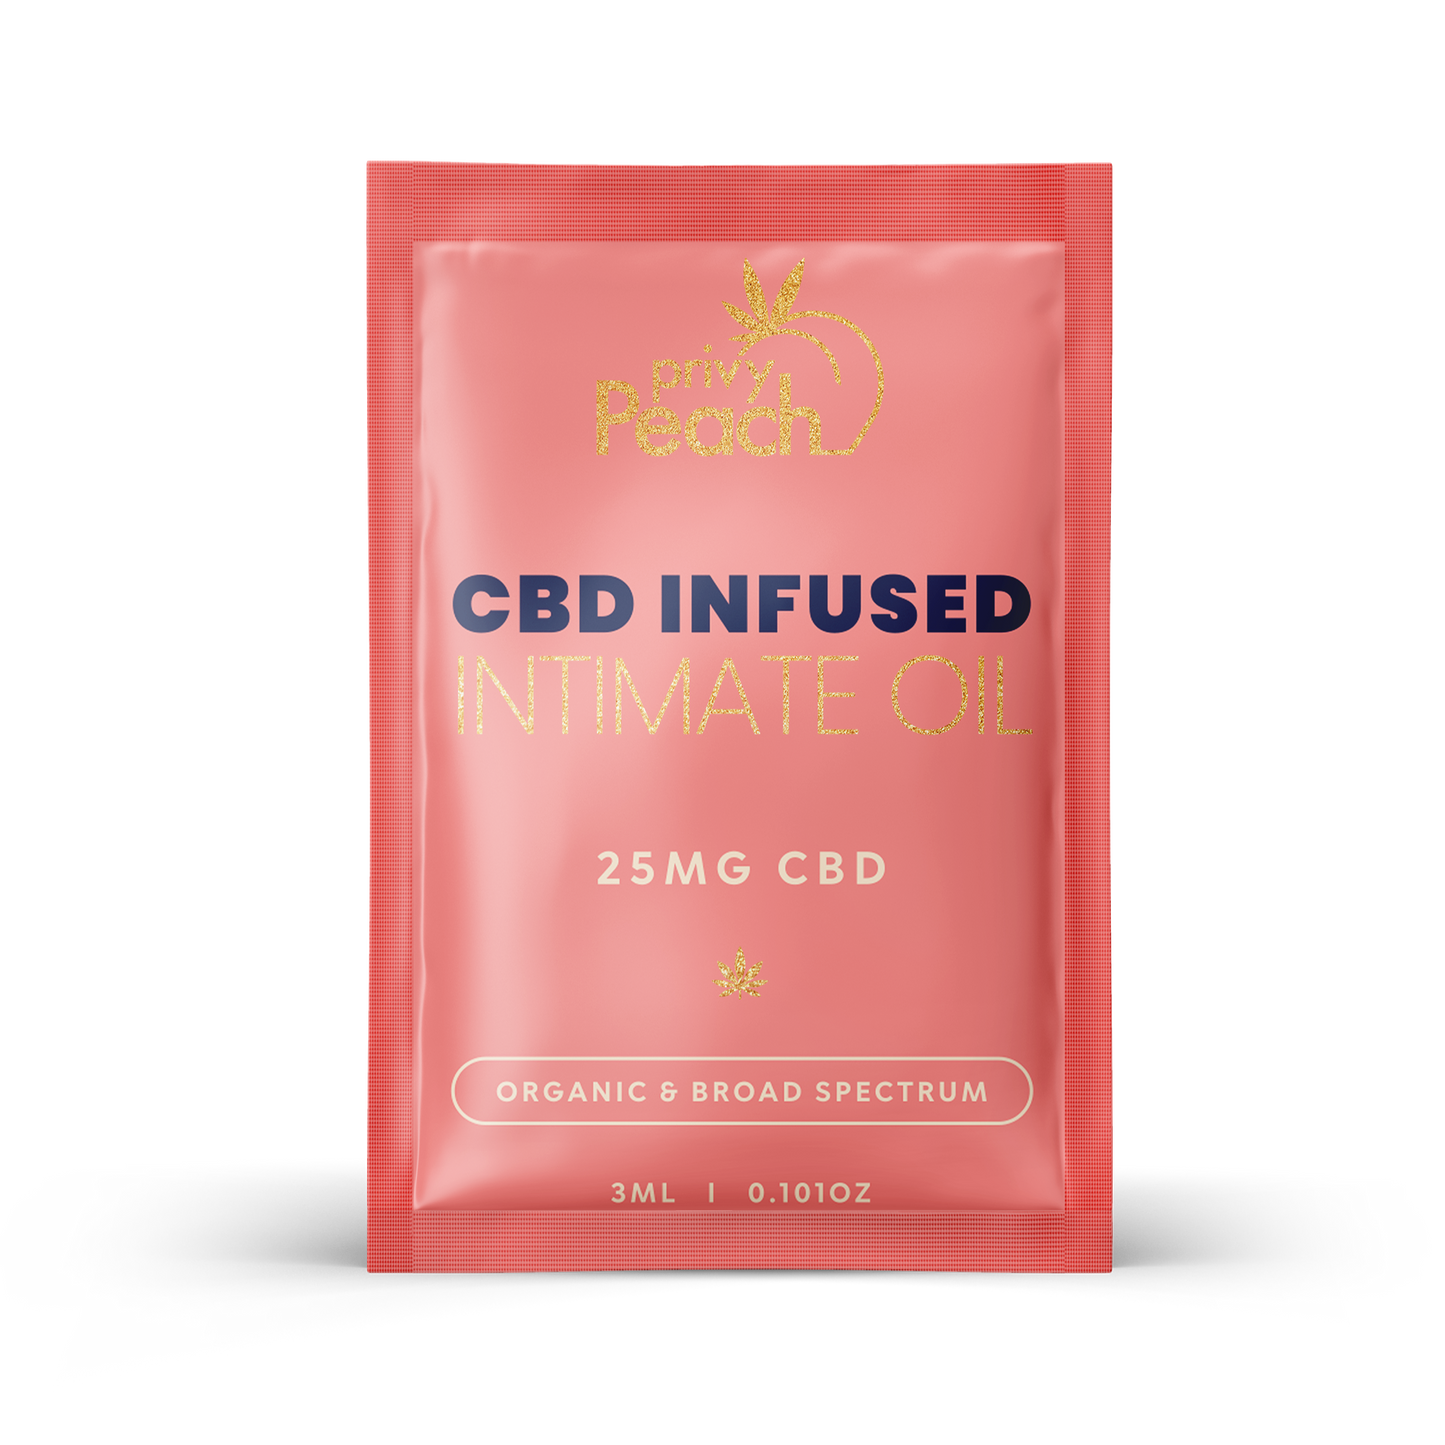 CBD infused Intimate Oil by Privy Peach